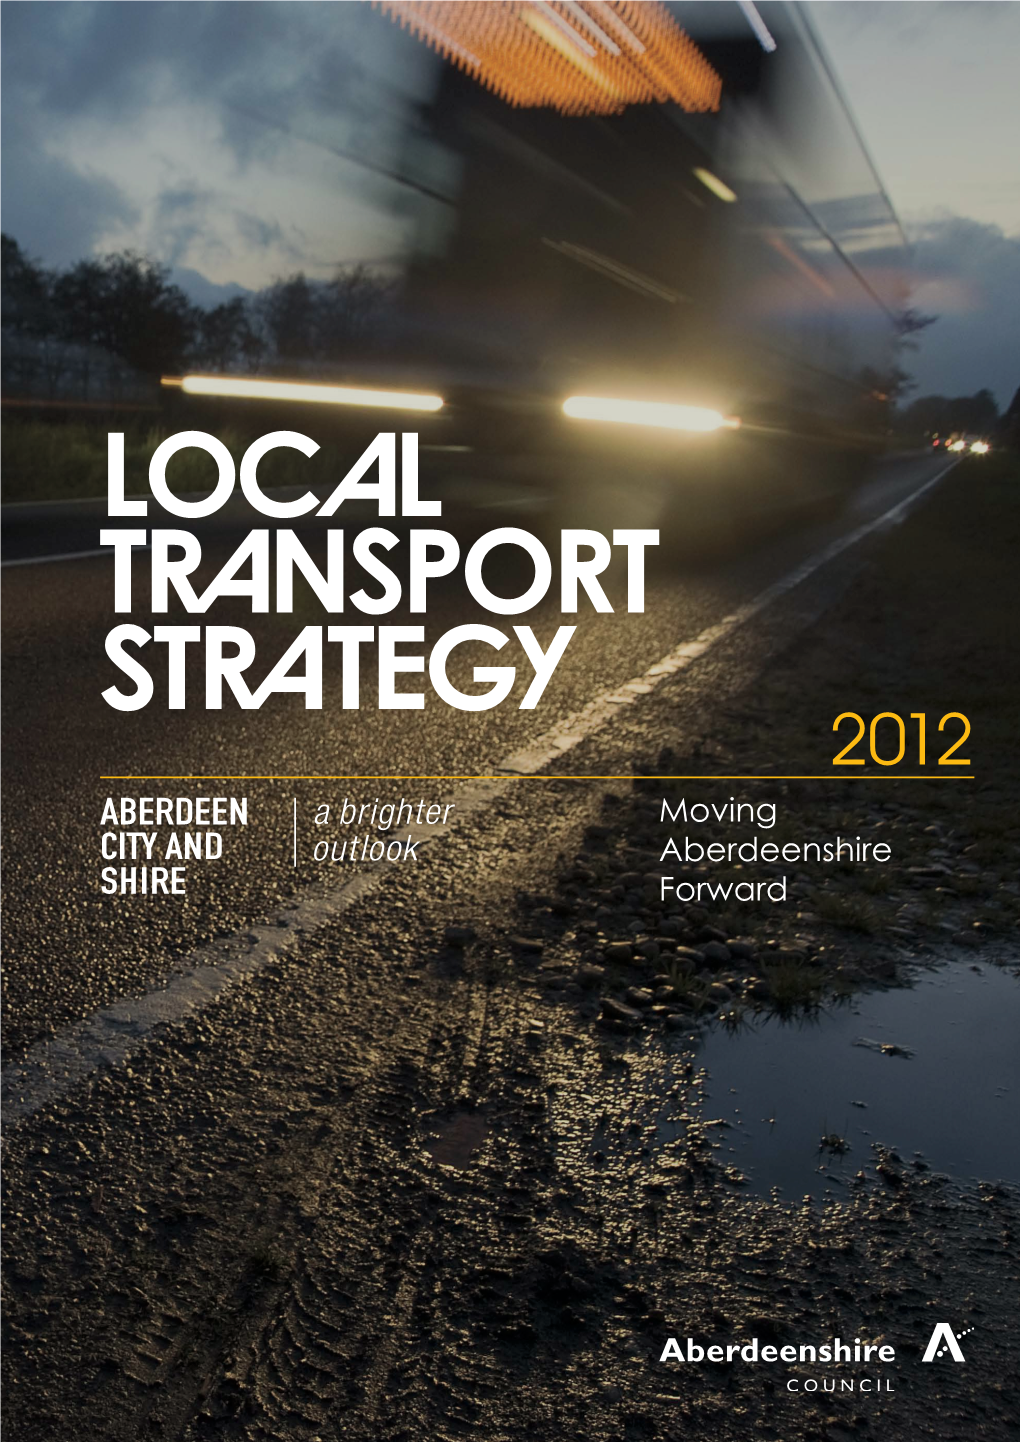 Aberdeenshire Council Local Transport Strategy 2012